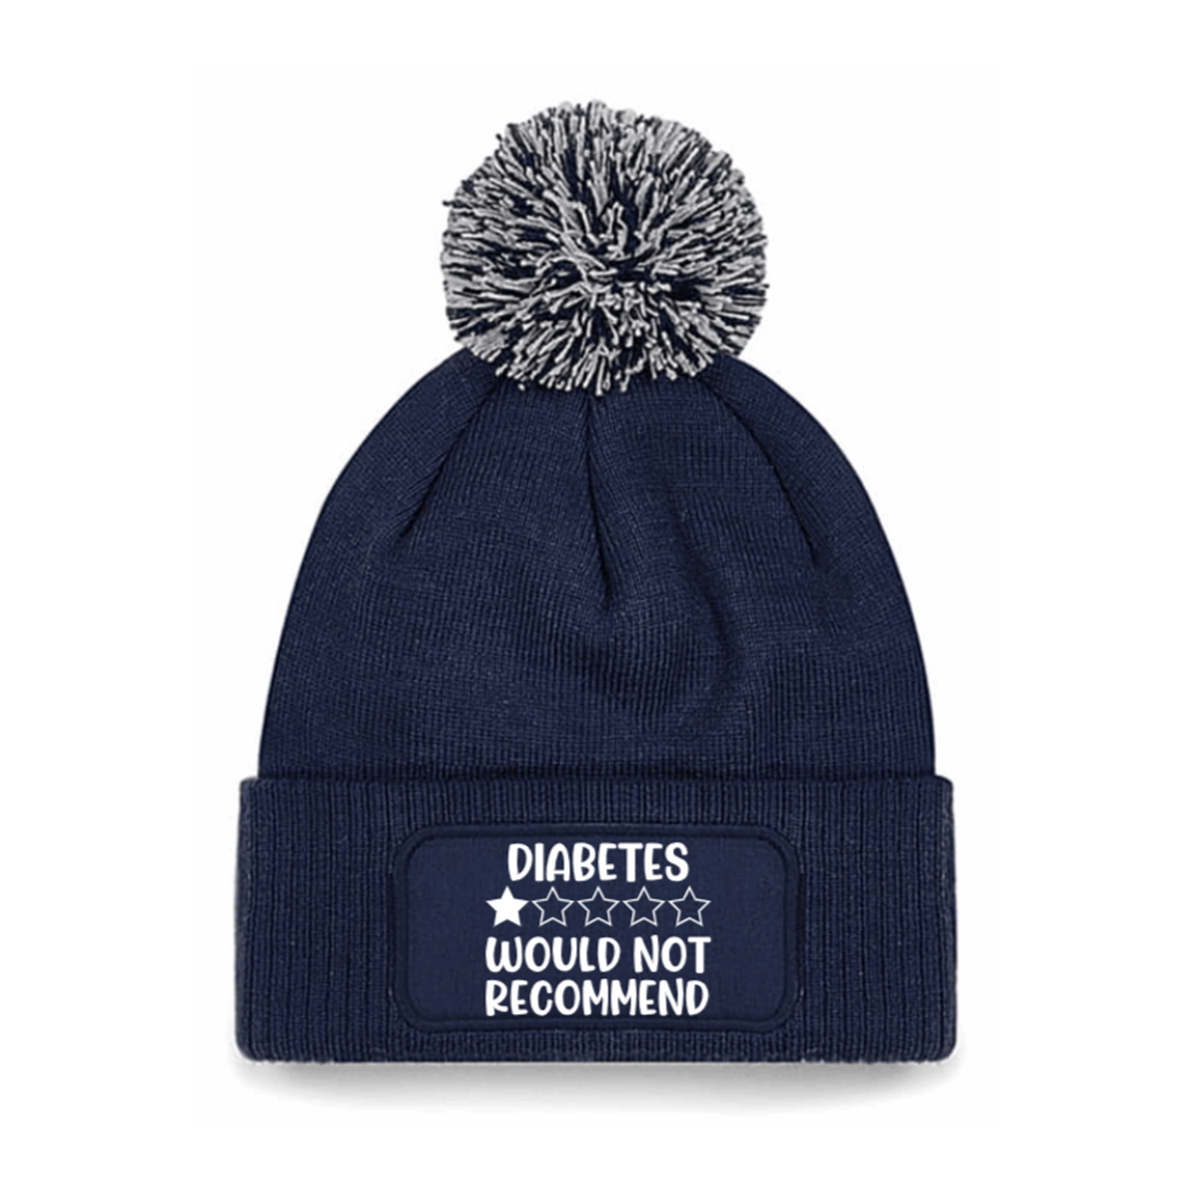 Diabetes * Would Not Recommend Beanie Hat